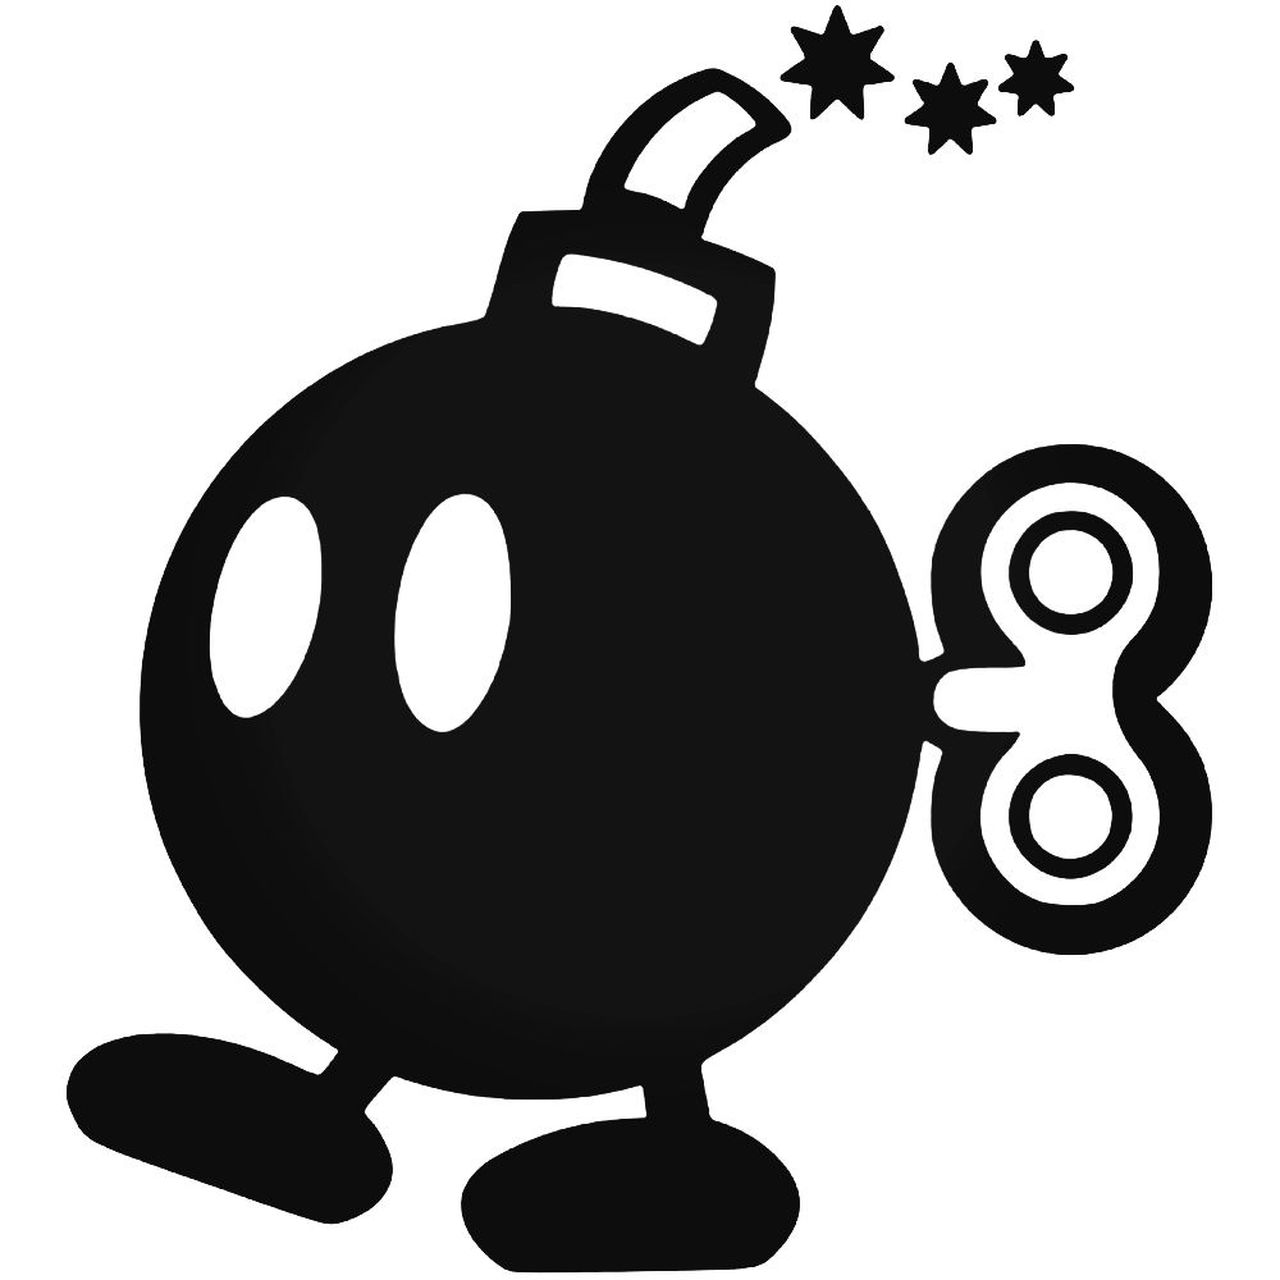 Mario bomb with fizz 000 decal  13147.1510888202